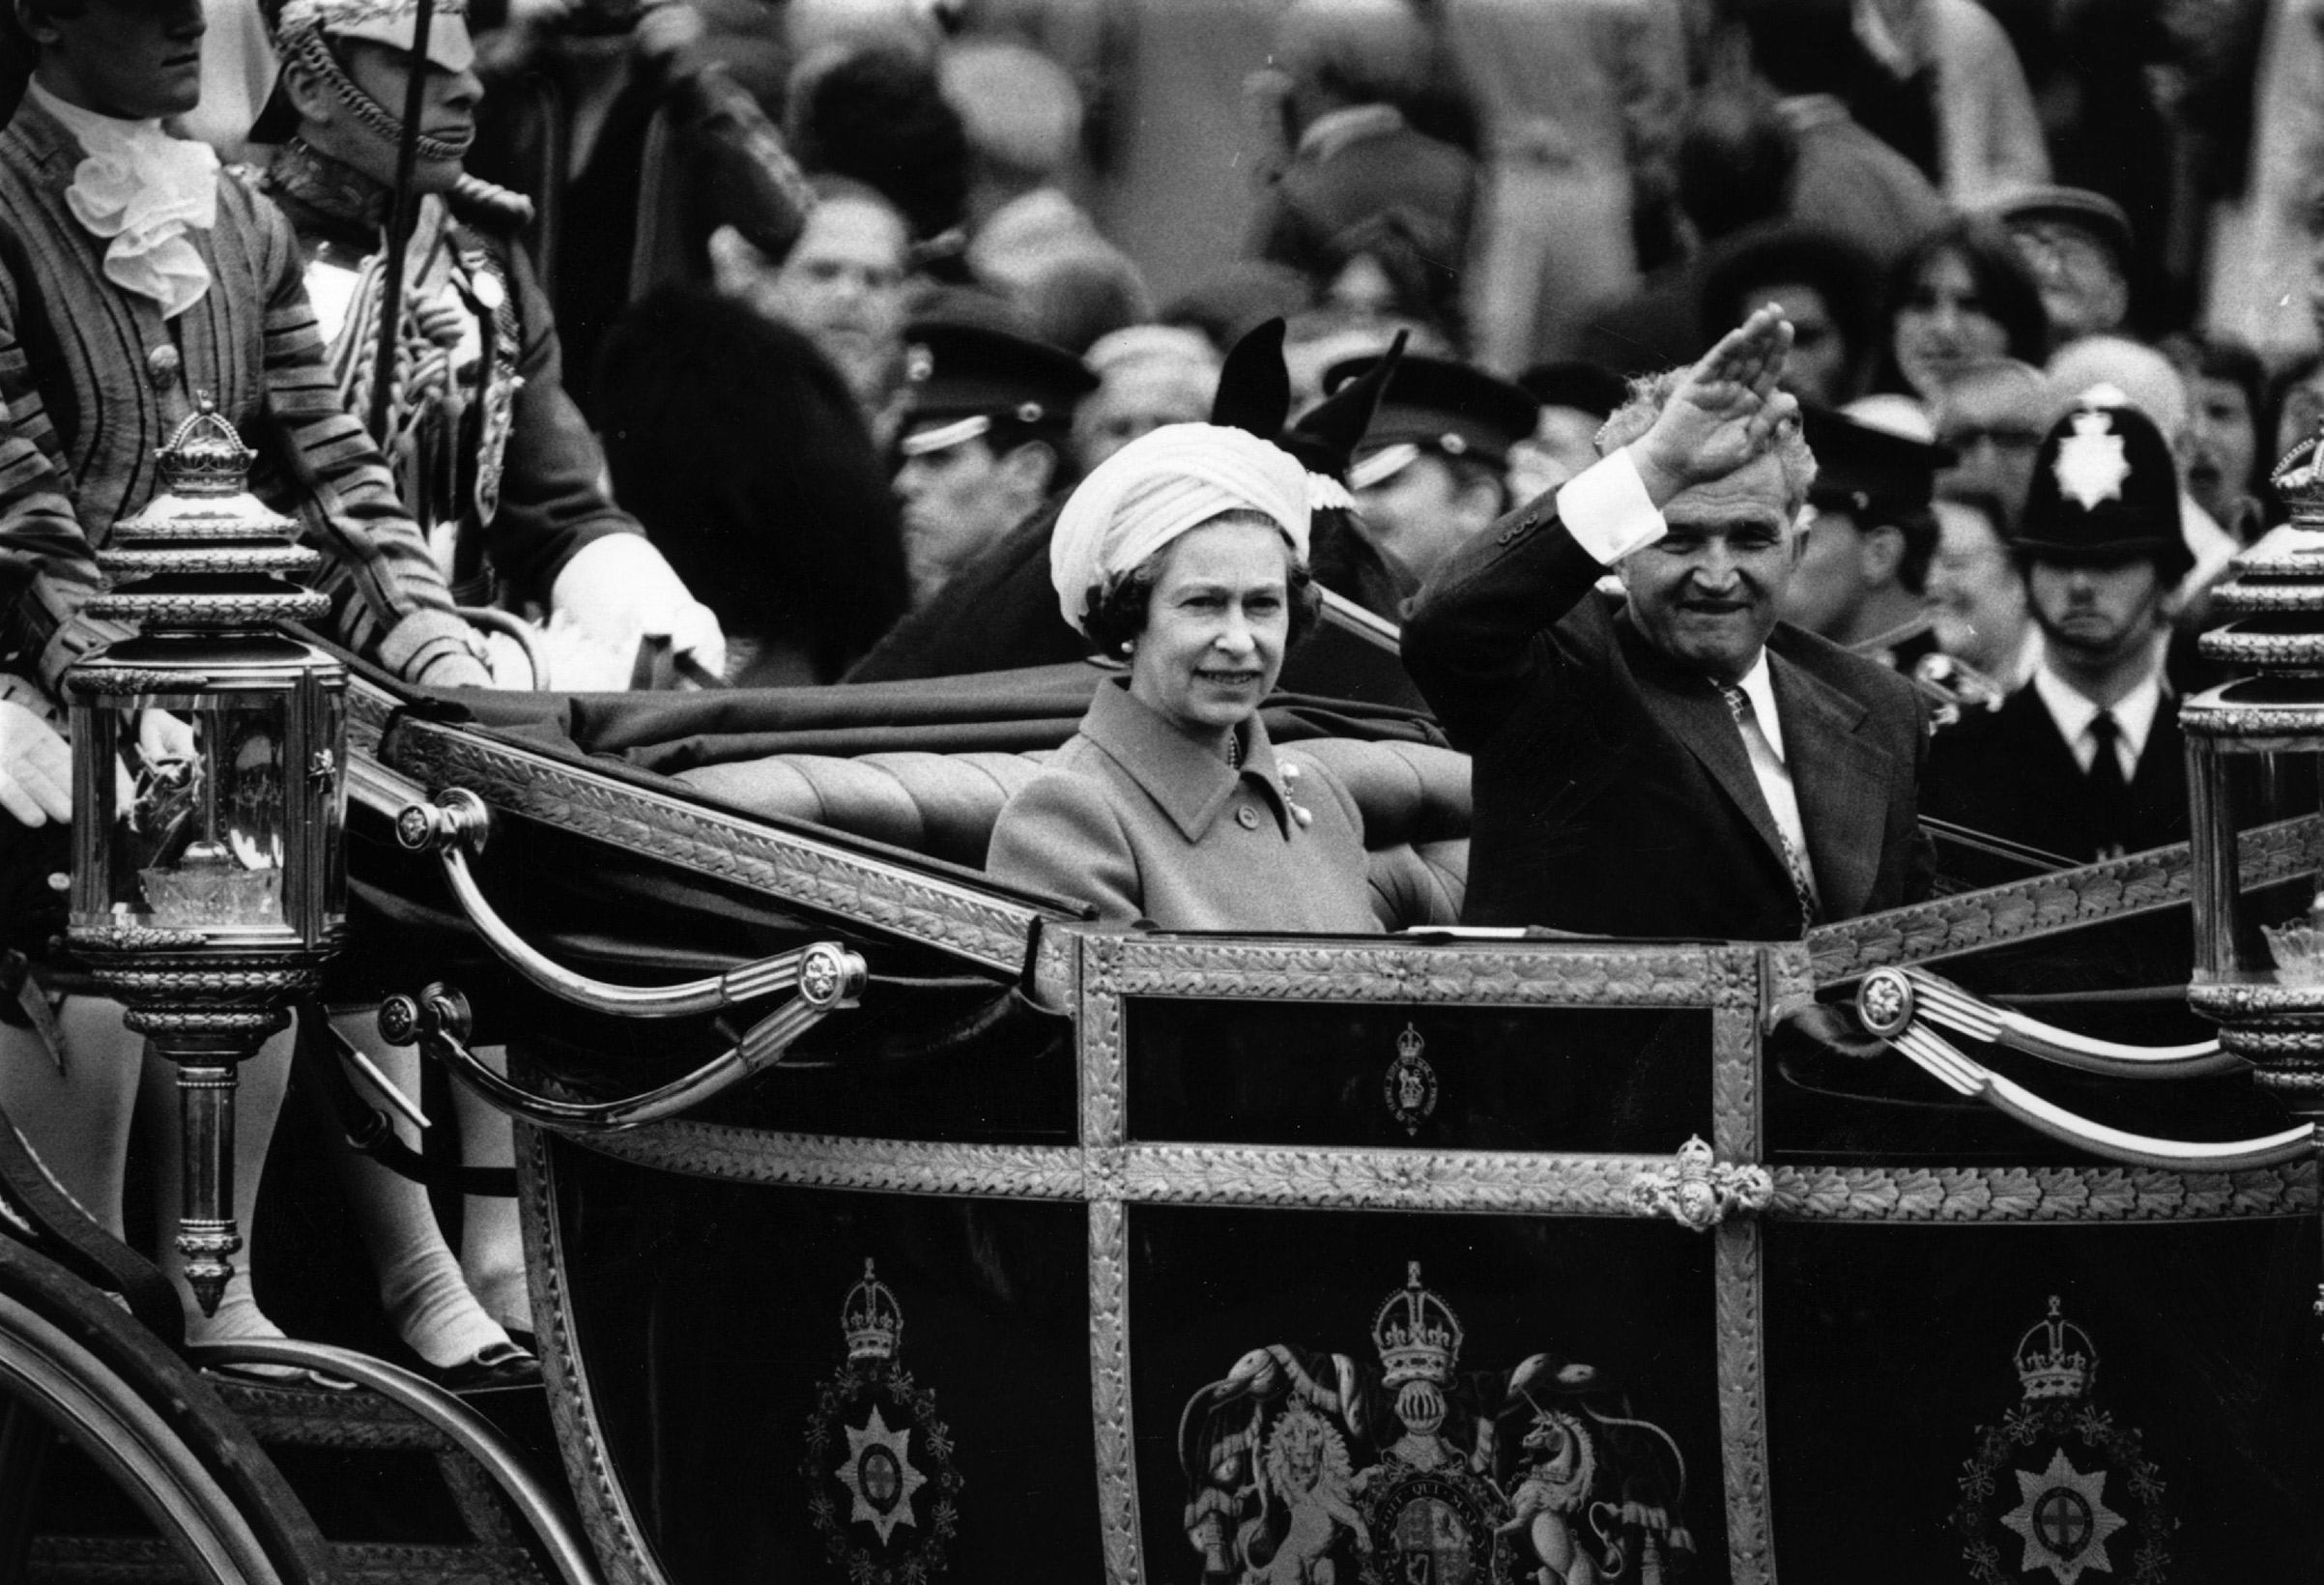 Romanian dictator Nicolae Ceausescu rides in the state carriage with Queen Elizabeth II on his official visit to Britain on June 13, 1978. (Central Press—Getty Images)